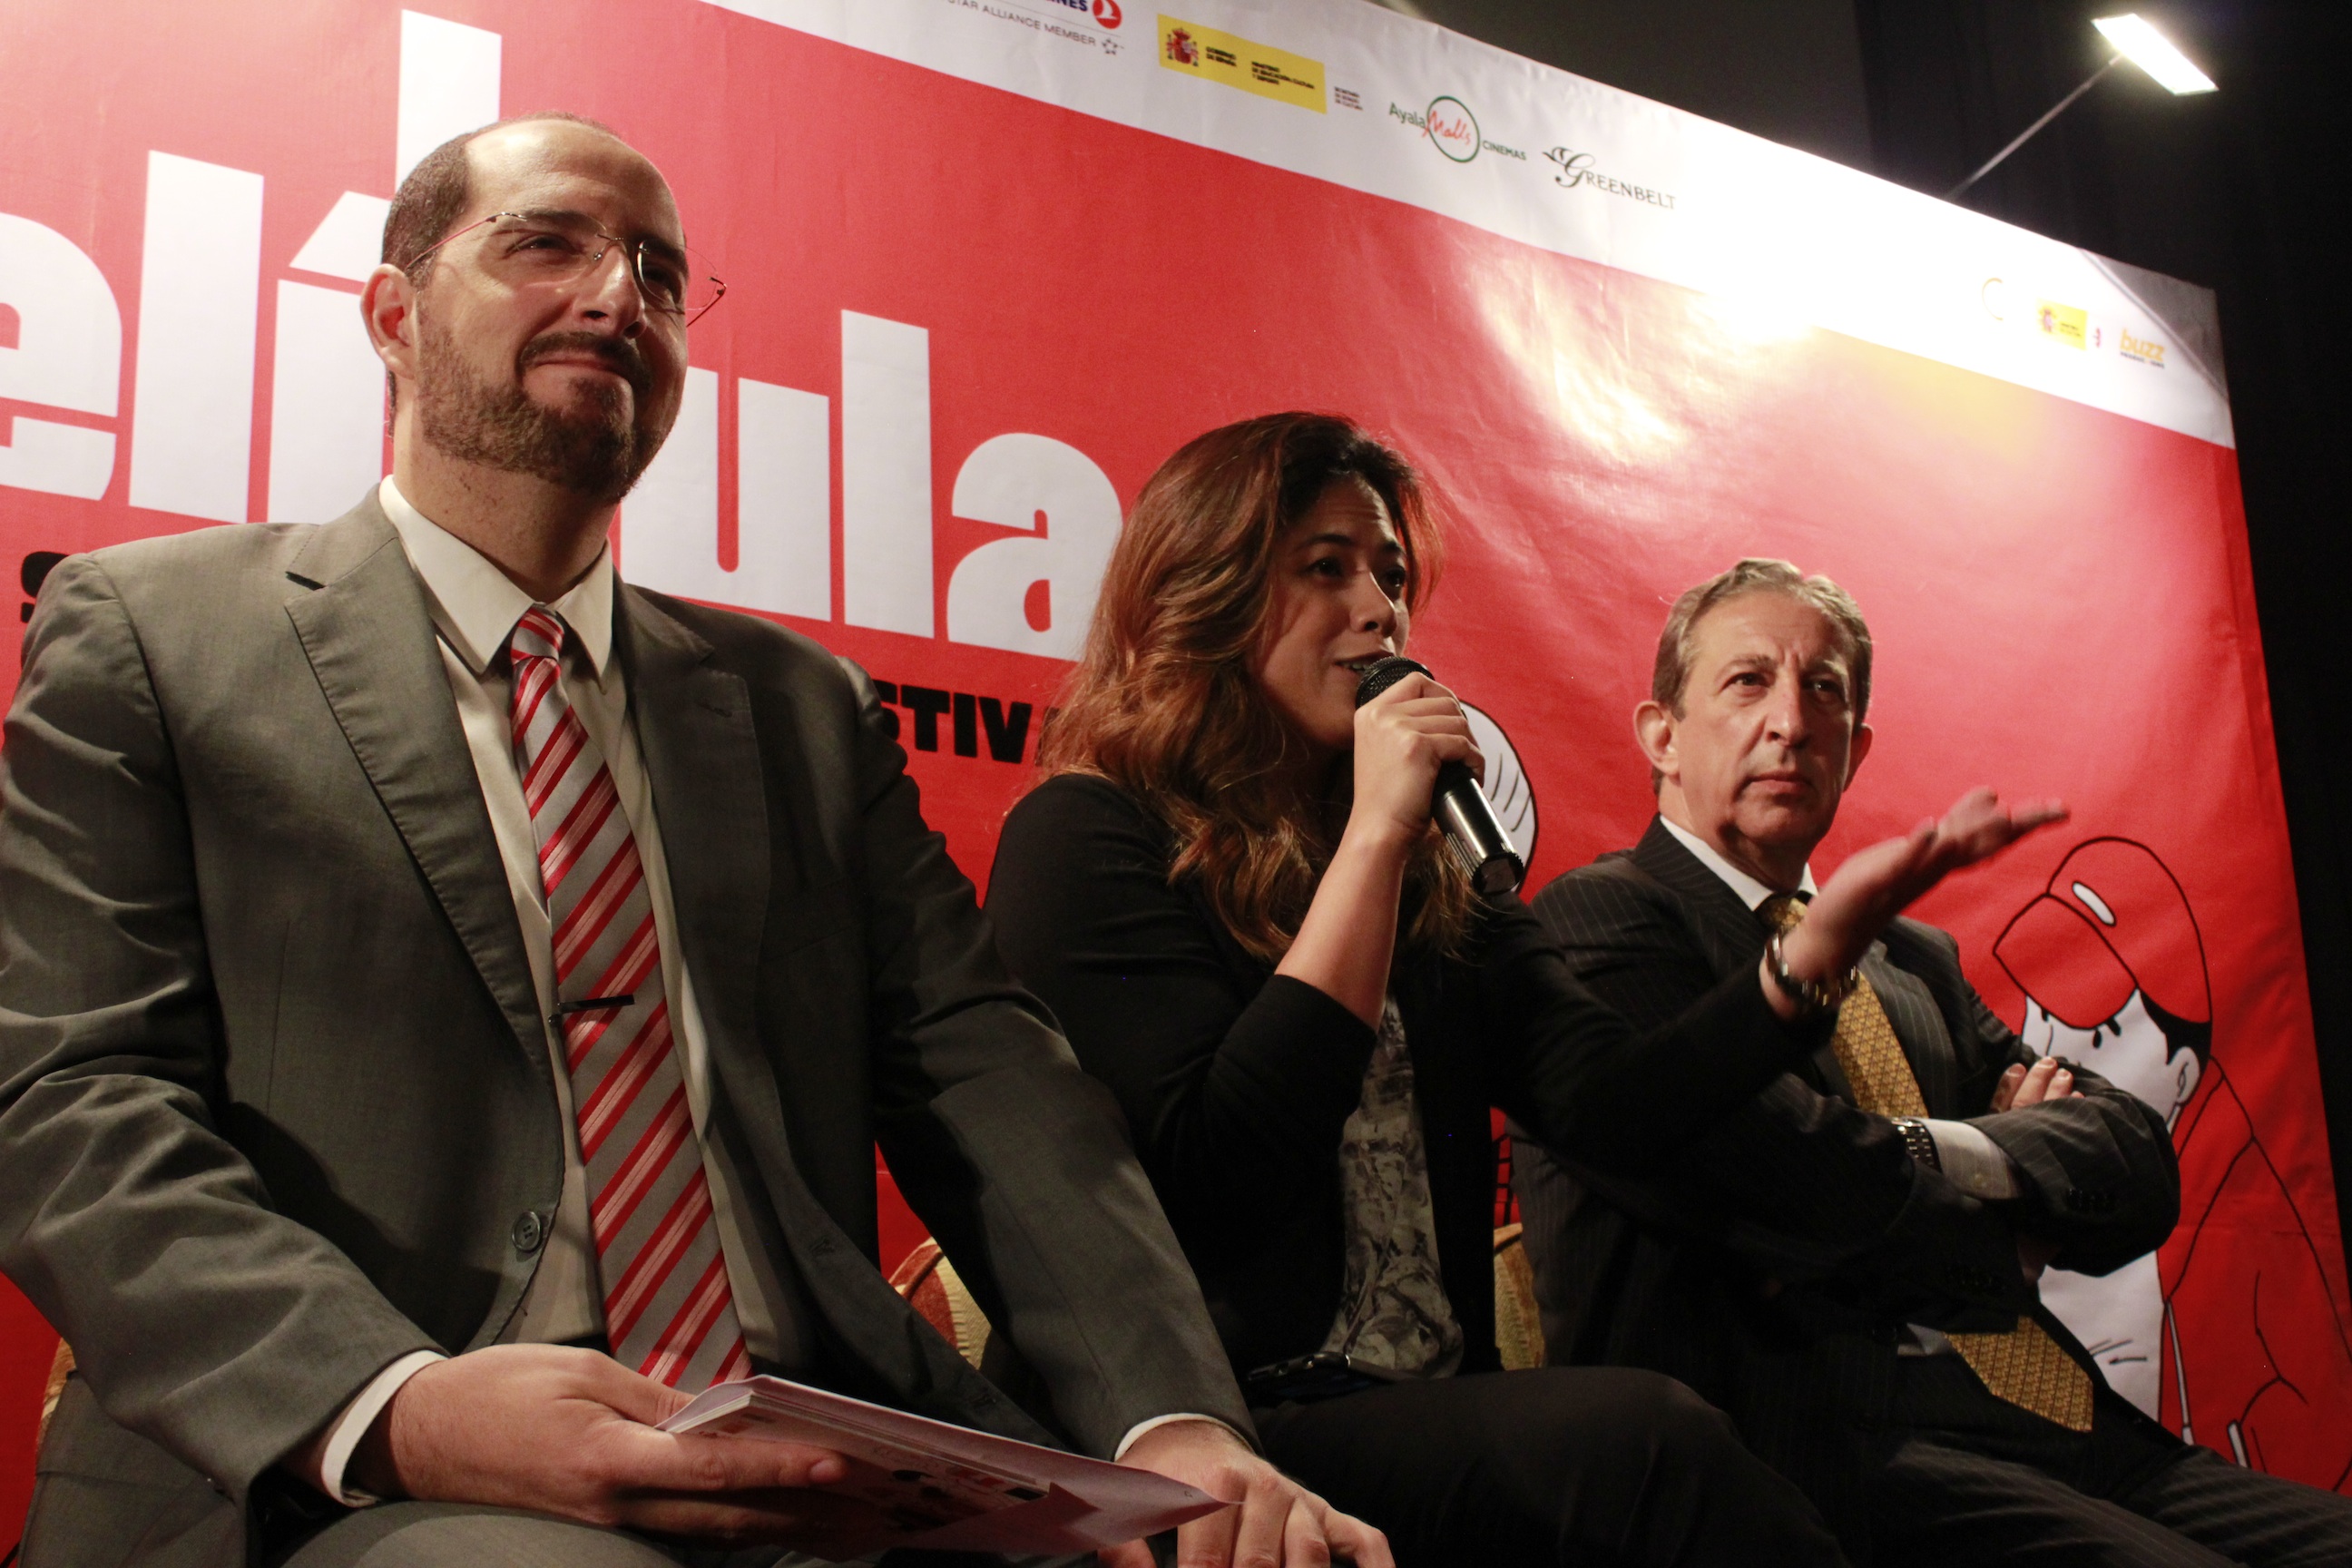 Mr. Carlos Madrid, (Director of Instituto Cervantes), FDCP Chair Liza Diño, and His Excellency Ambassador Luis A. Calvo Castaño (Ambassador of the Embassy of Spain) at the Pelicula press conference​